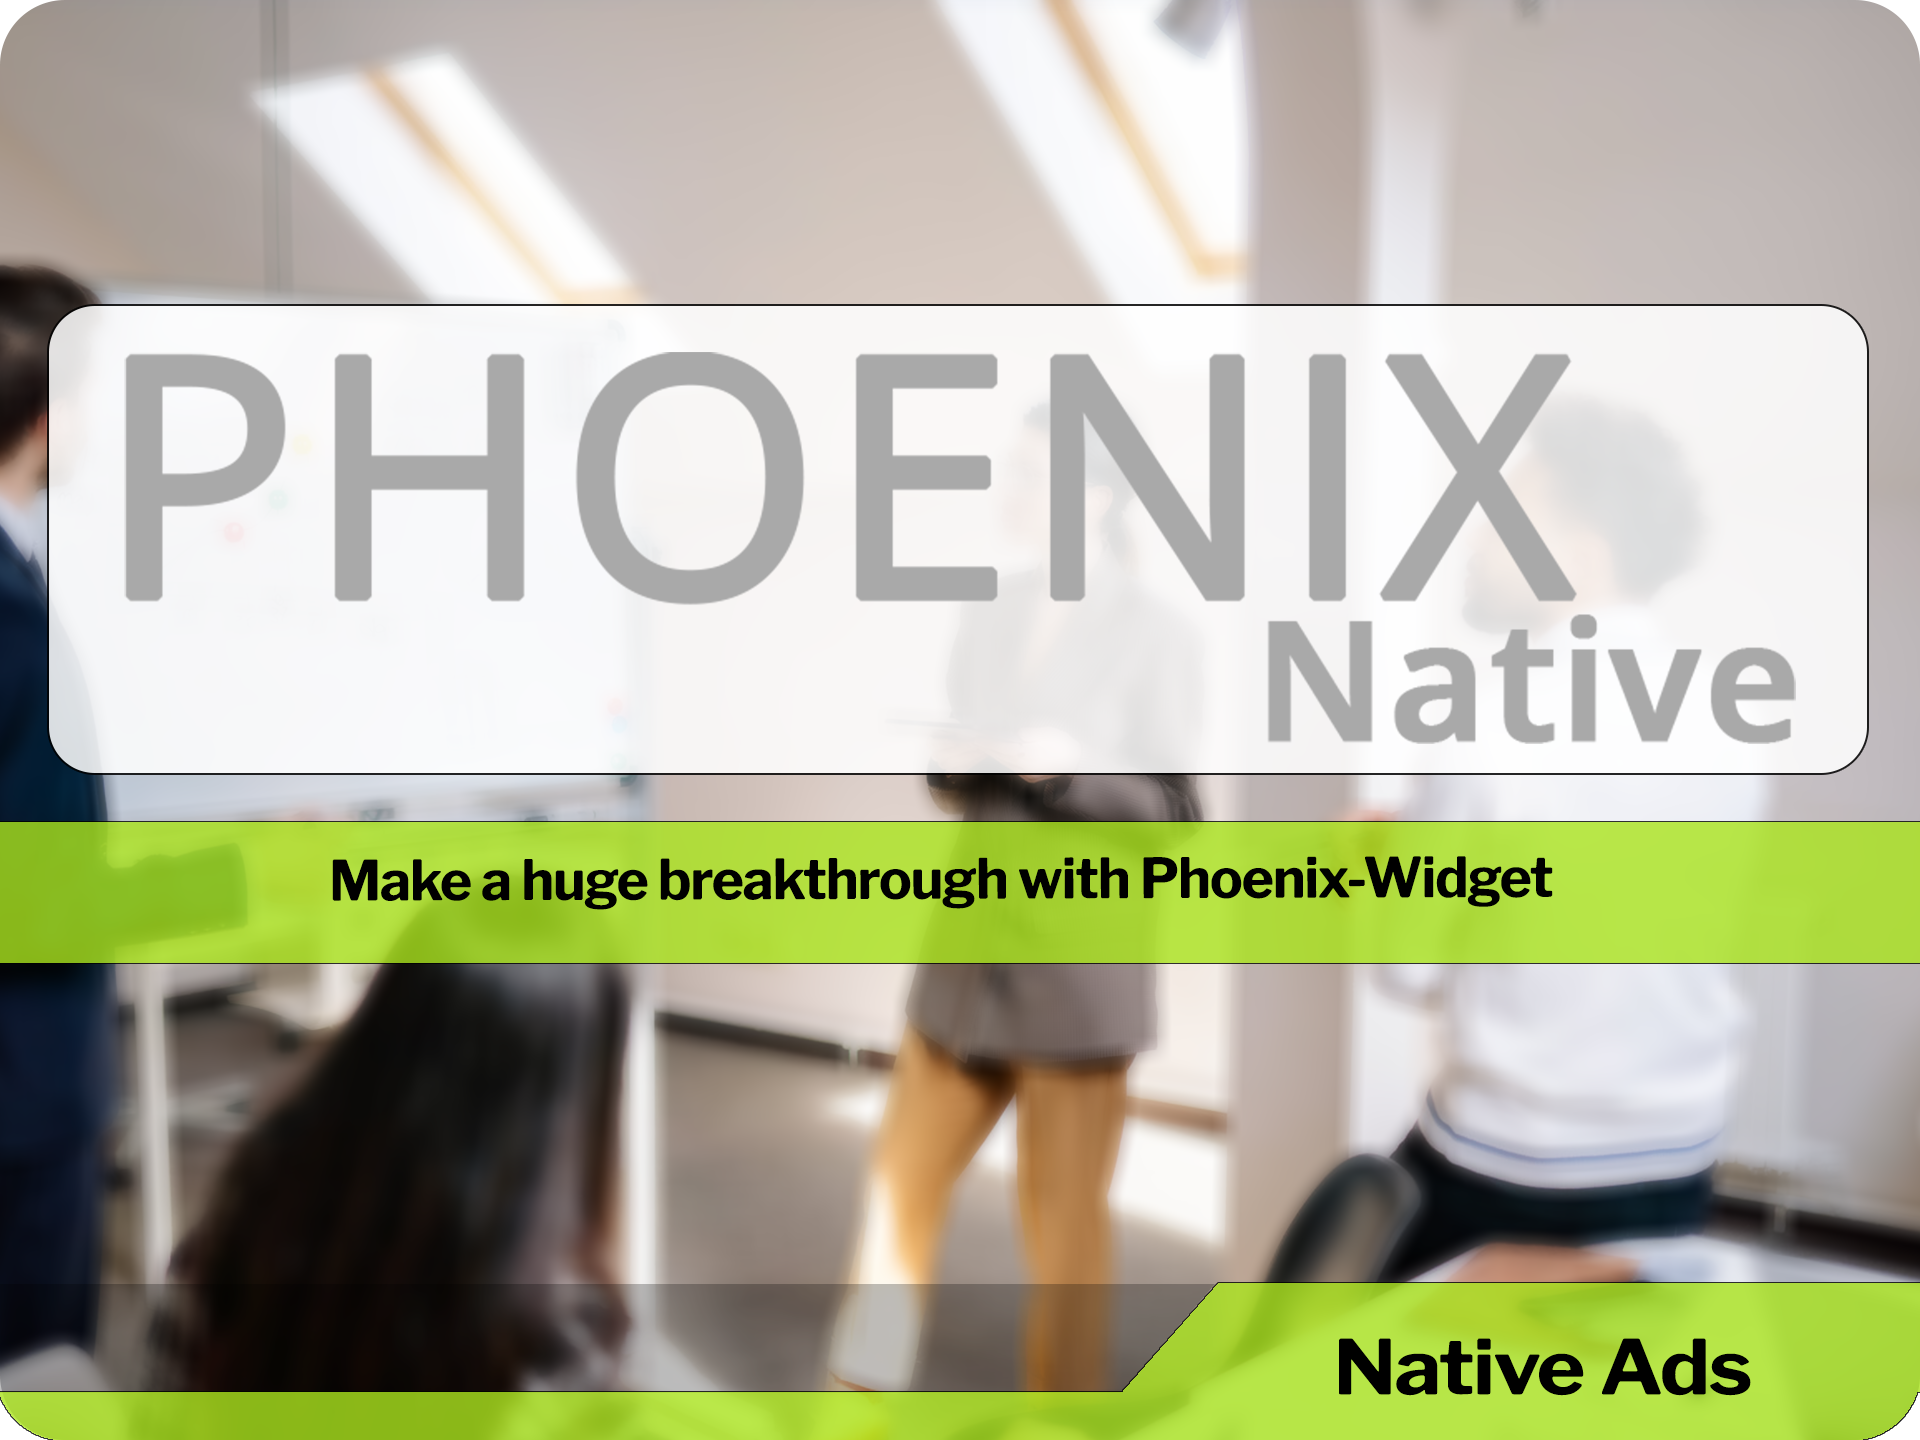 How to boost your business and increase traffic knows Phoenix-Widget